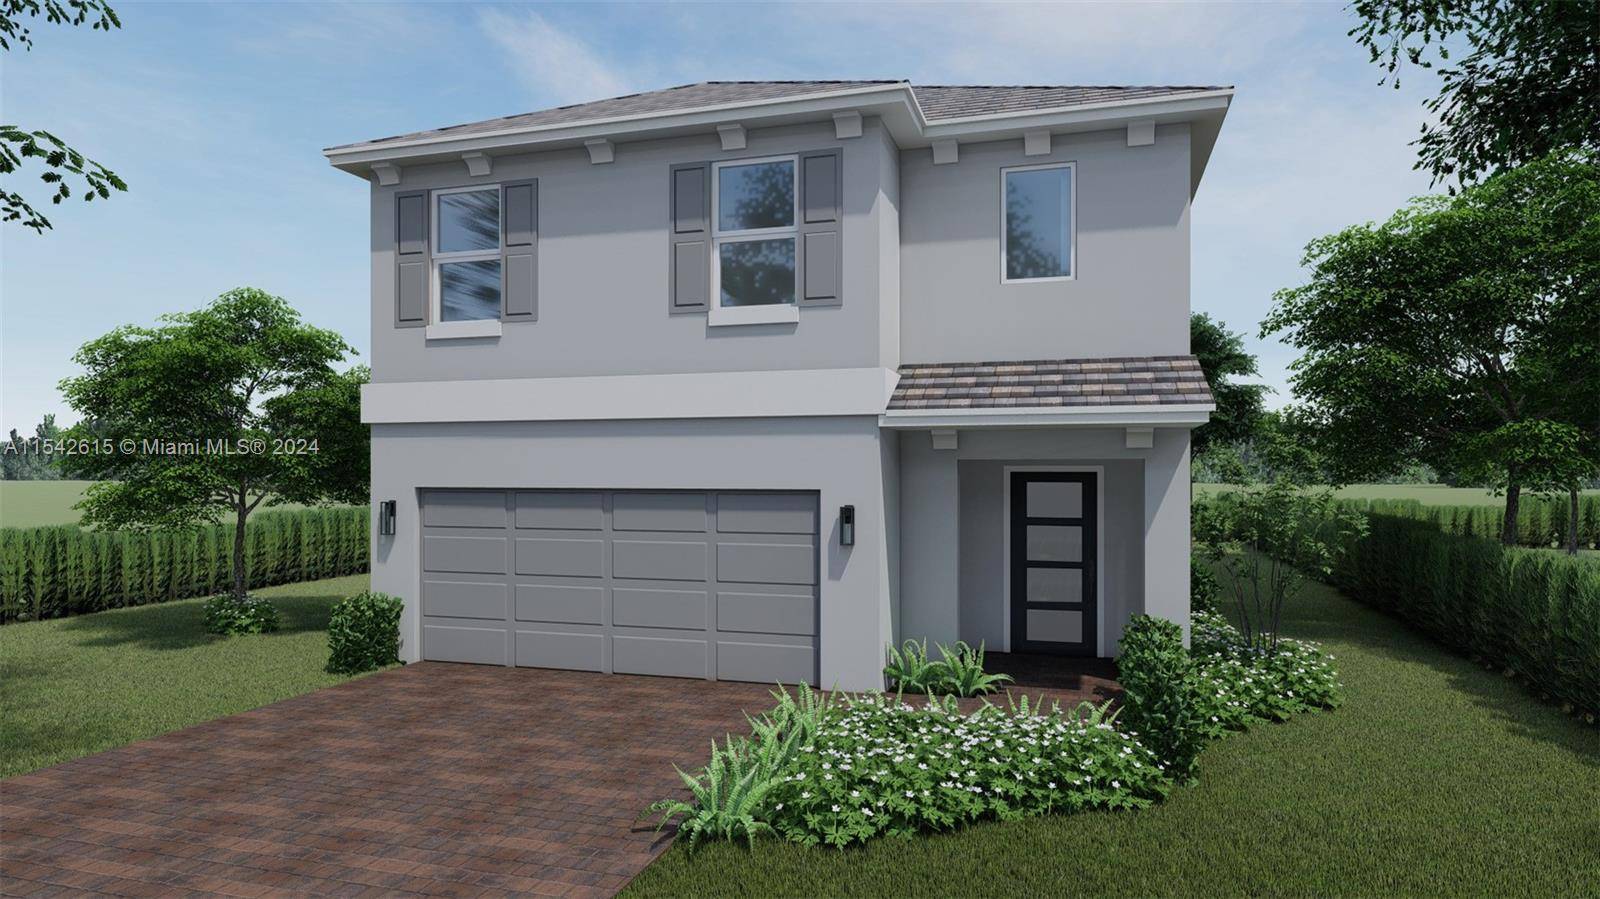 BRAND NEW HOME ! Beautiful 5 bed, 3 bath home with an upstairs living area and a 2 car garage.